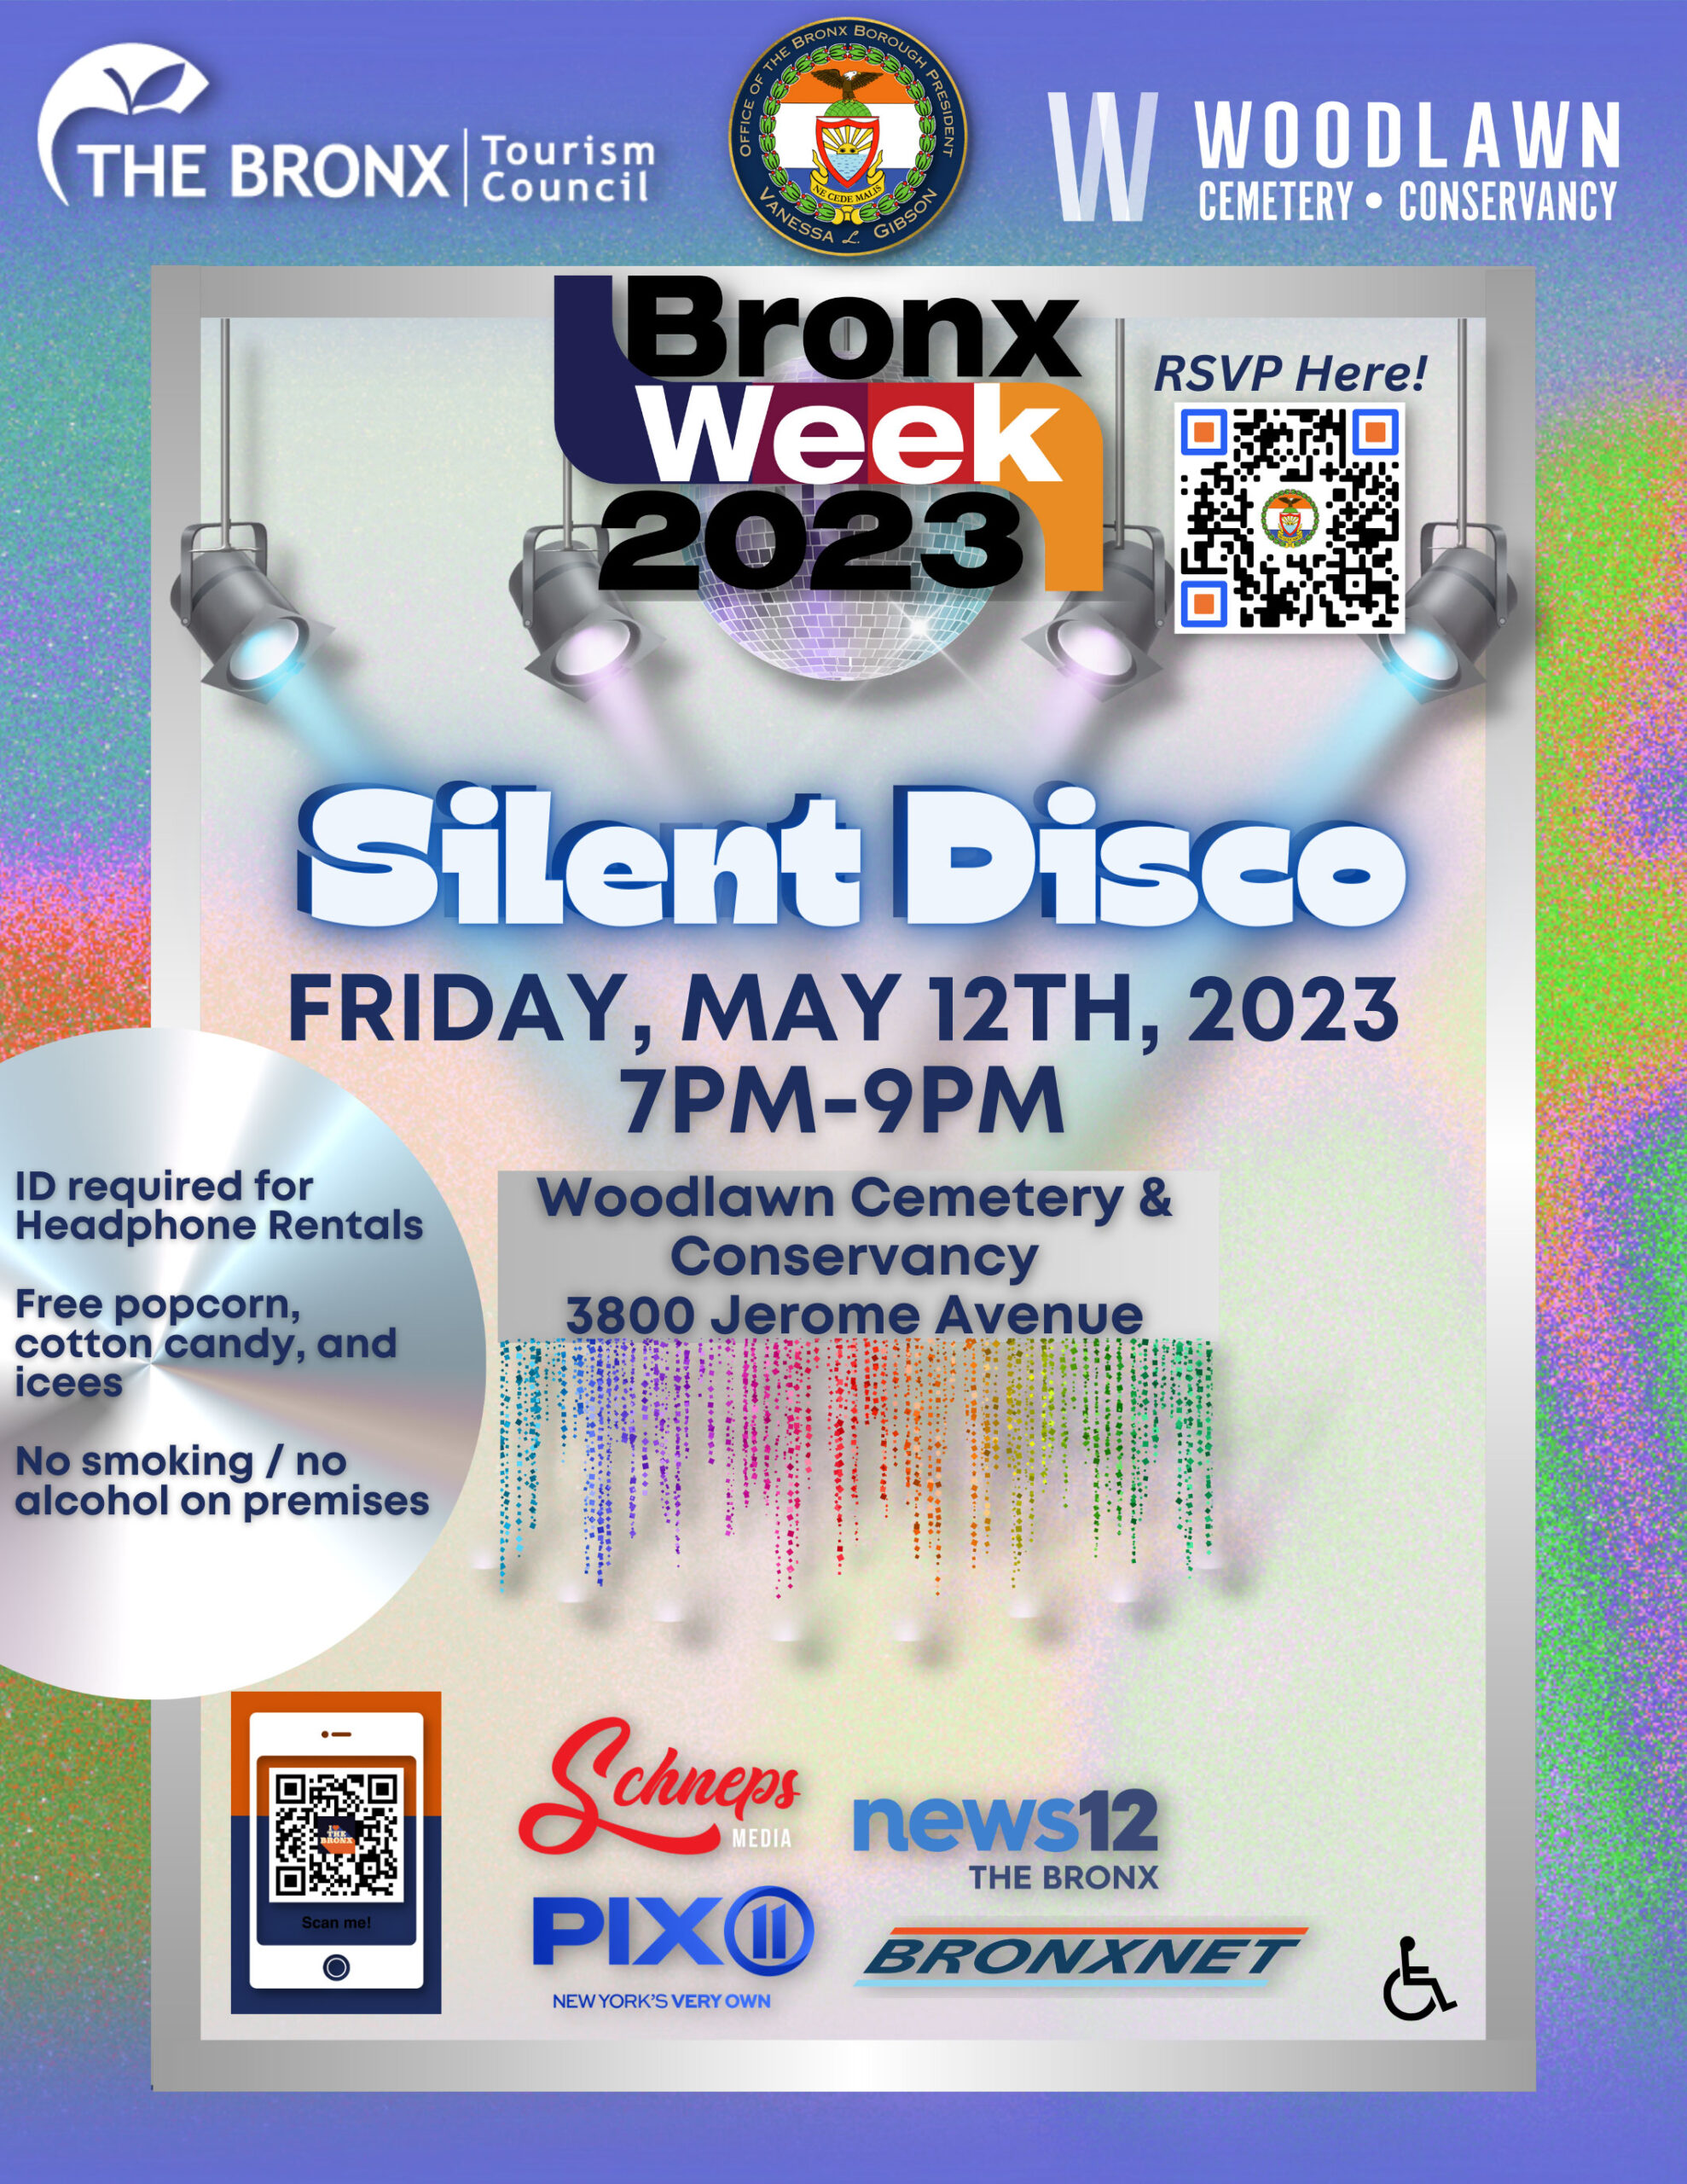 Flyer for the Bronx Week Silent Disco on May 19